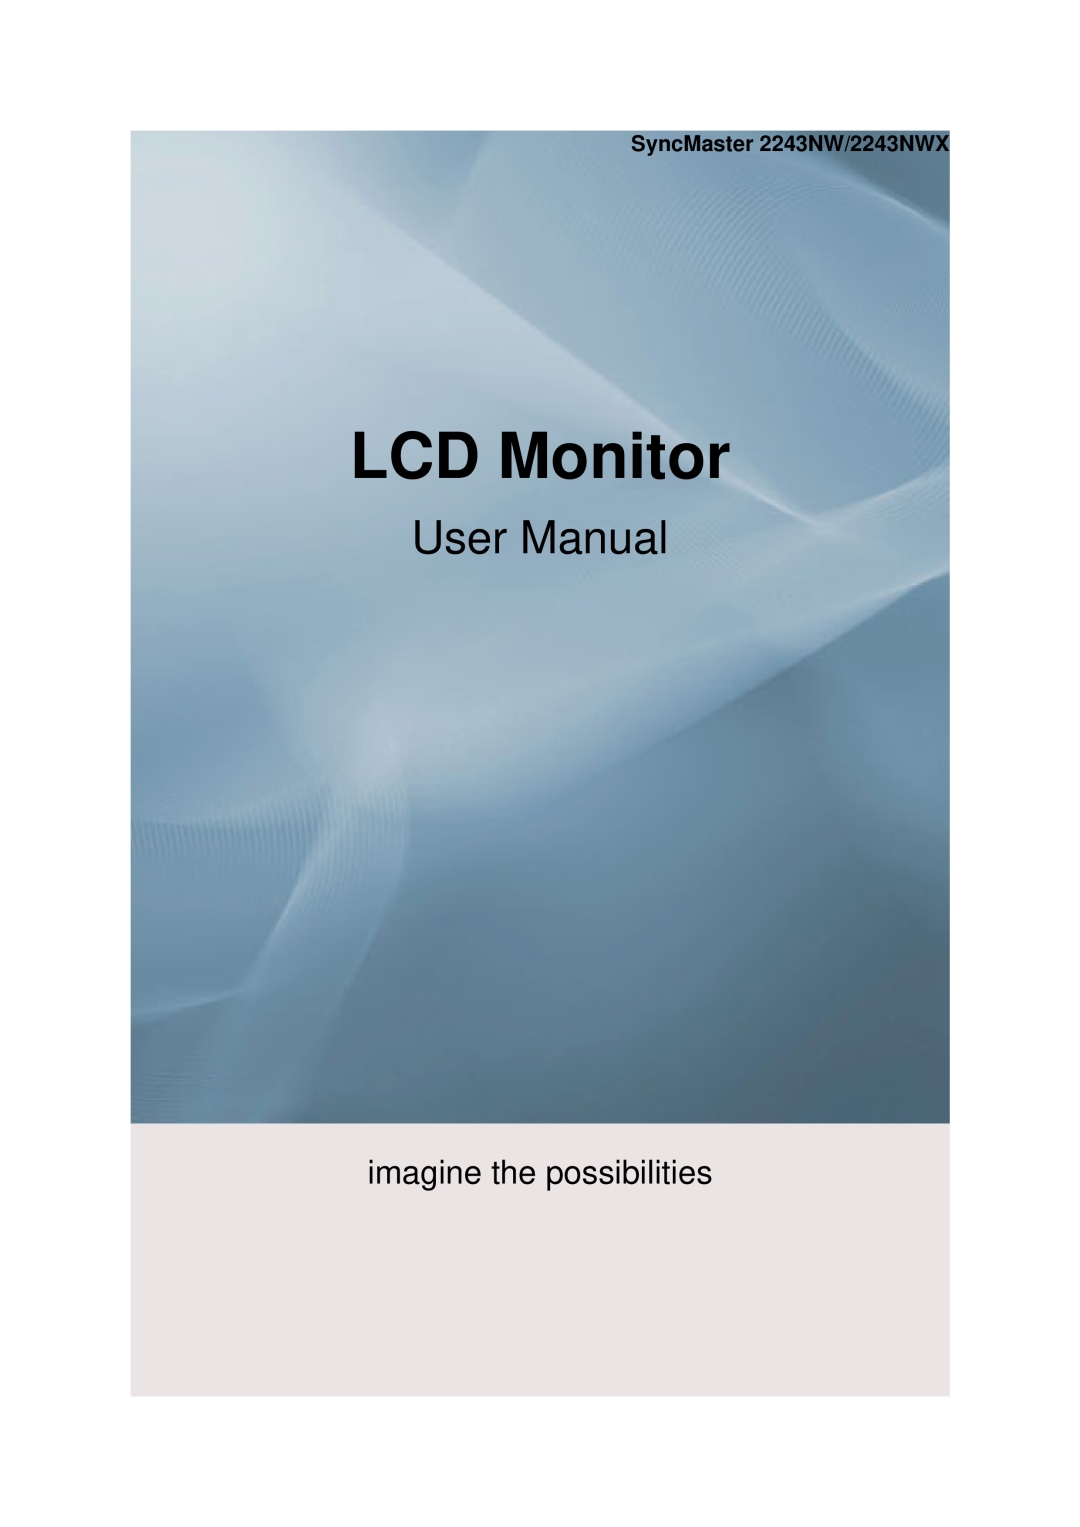 Samsung user manual SyncMaster 2243NW/2243NWX, LCD Monitor, User Manual, imagine the possibilities 